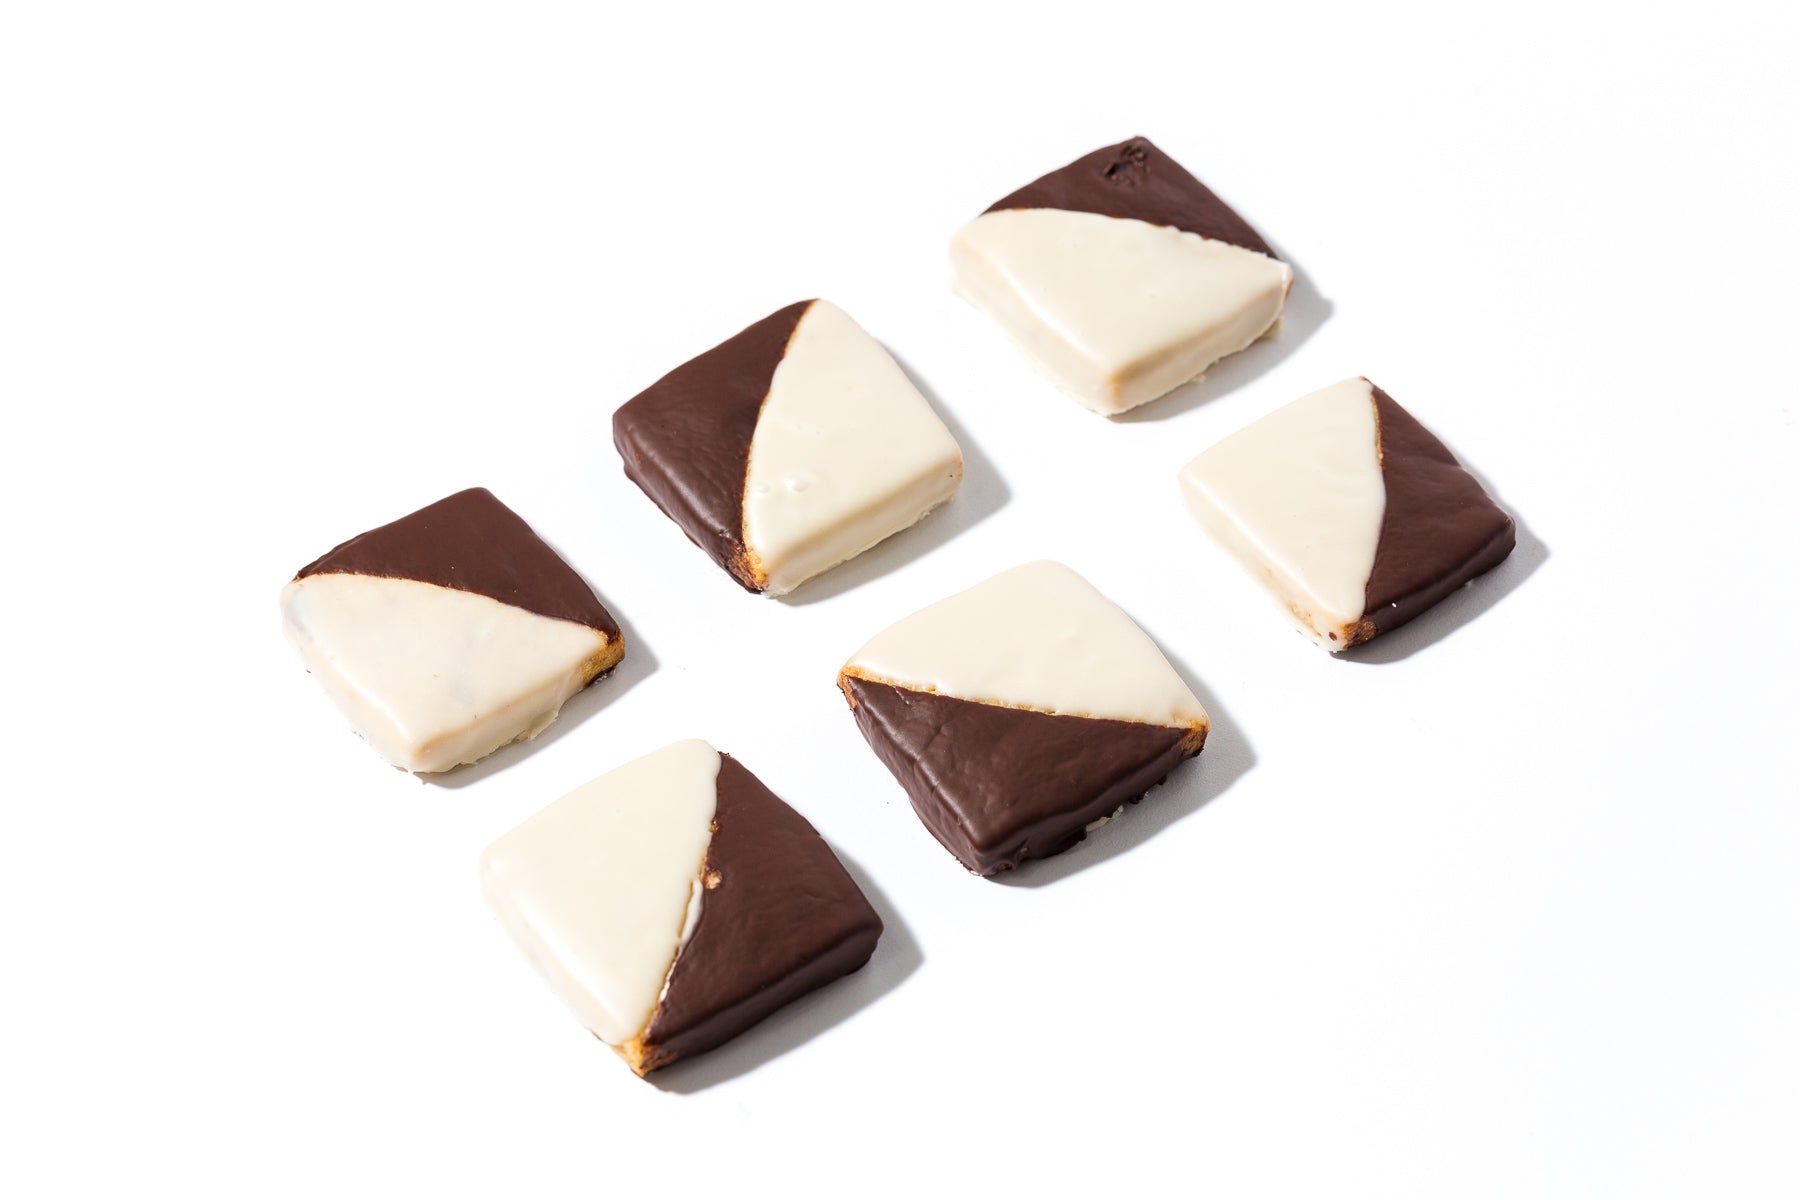 Image from above of six finished Miss Jones Baking Co Black + White Espresso Shortbread Bars